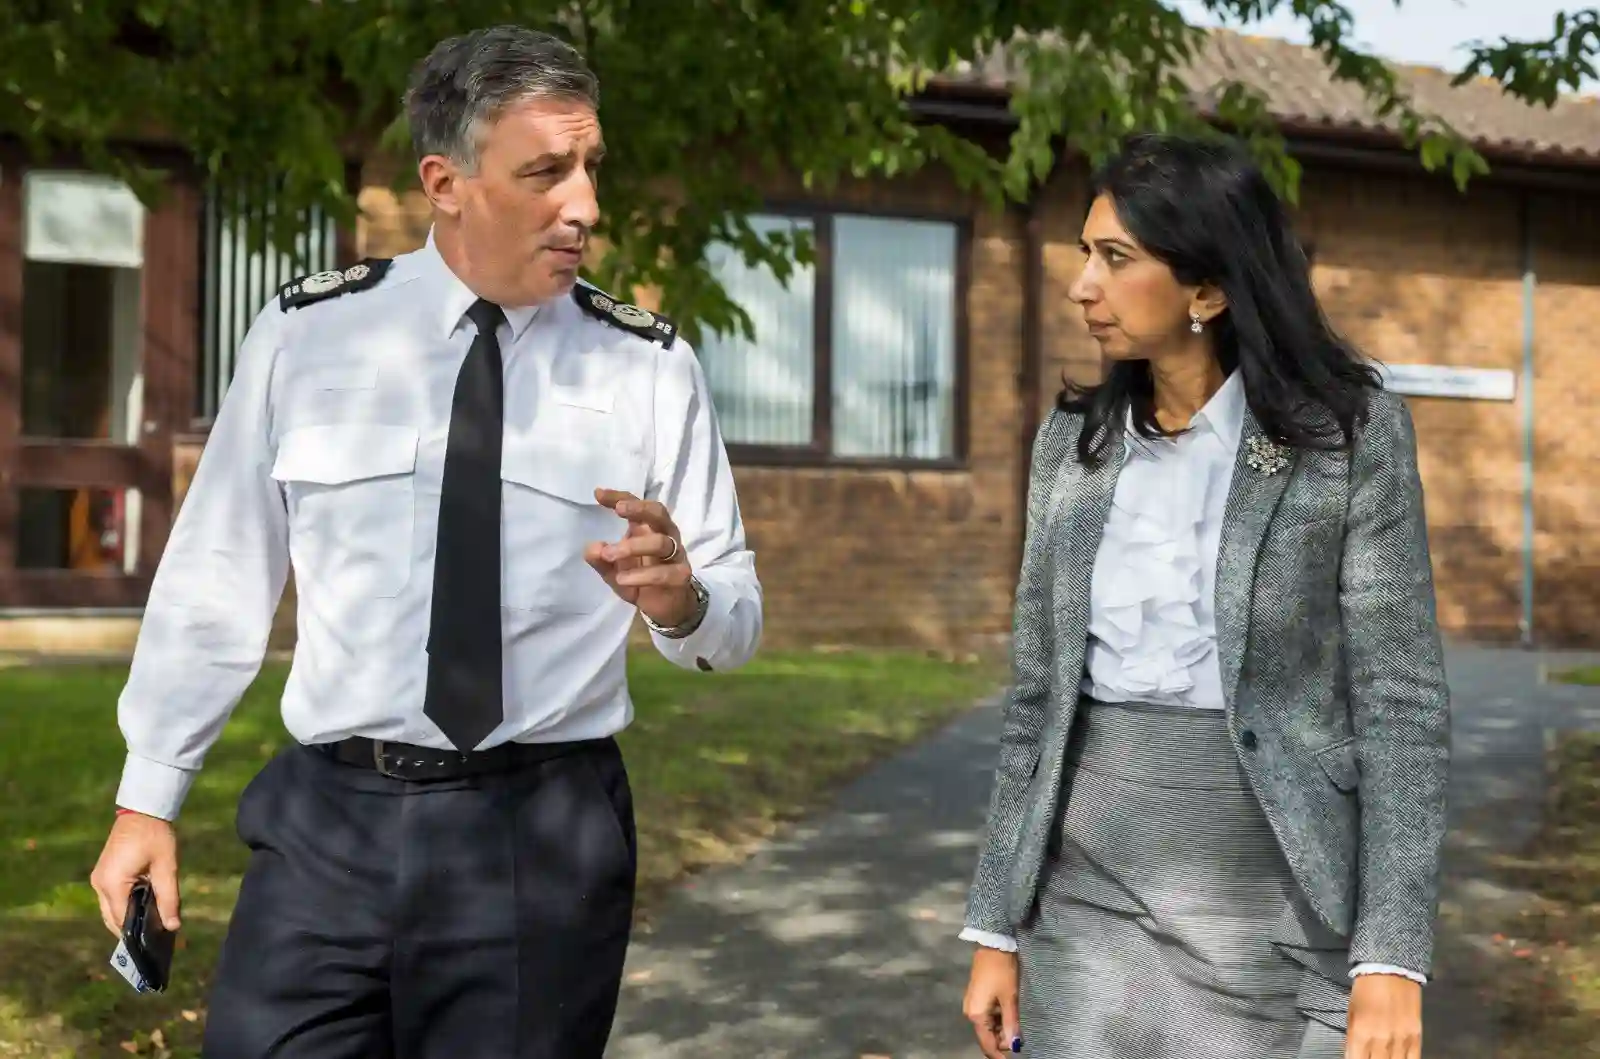 UK Home Secretary Suella Braverman visits troubled Leicester—Islamist lies nailed